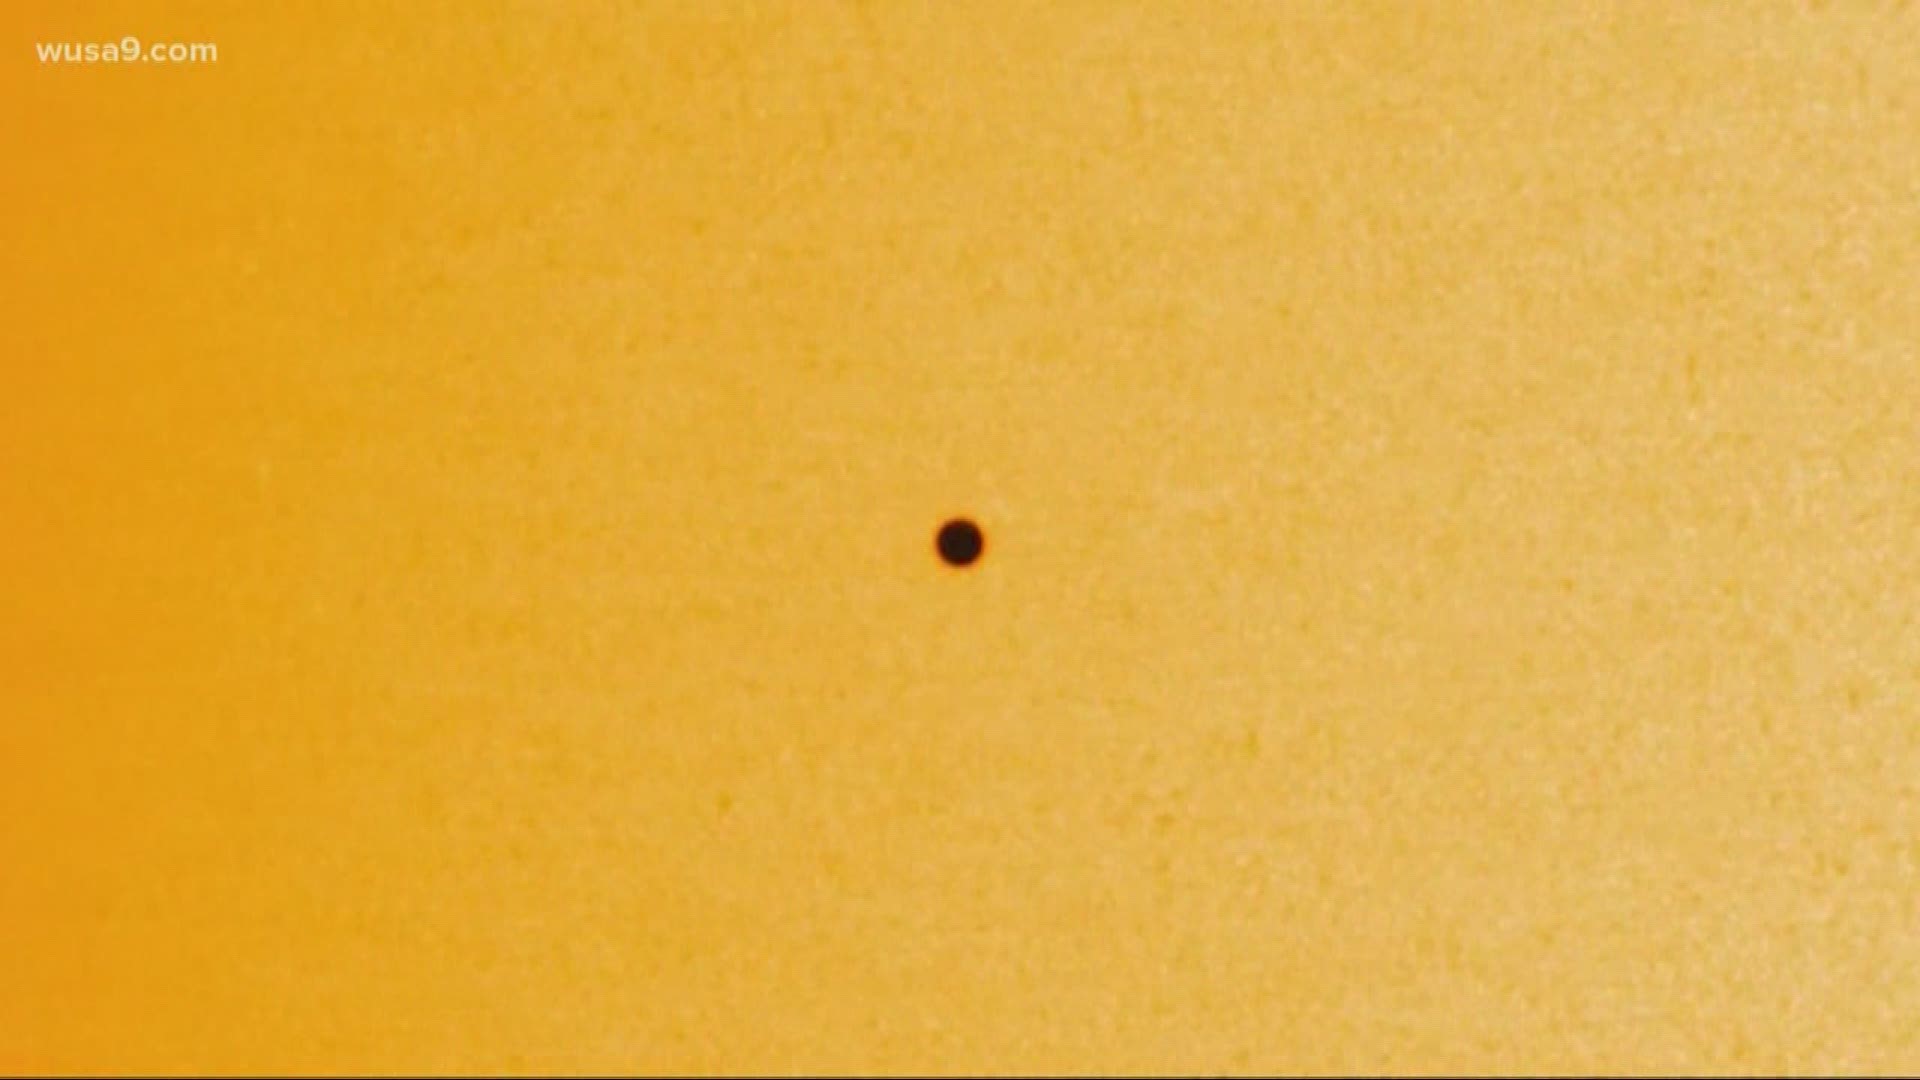 Monday's Mercury Transit was a rare and beautiful sight that won't happen again until 2032.